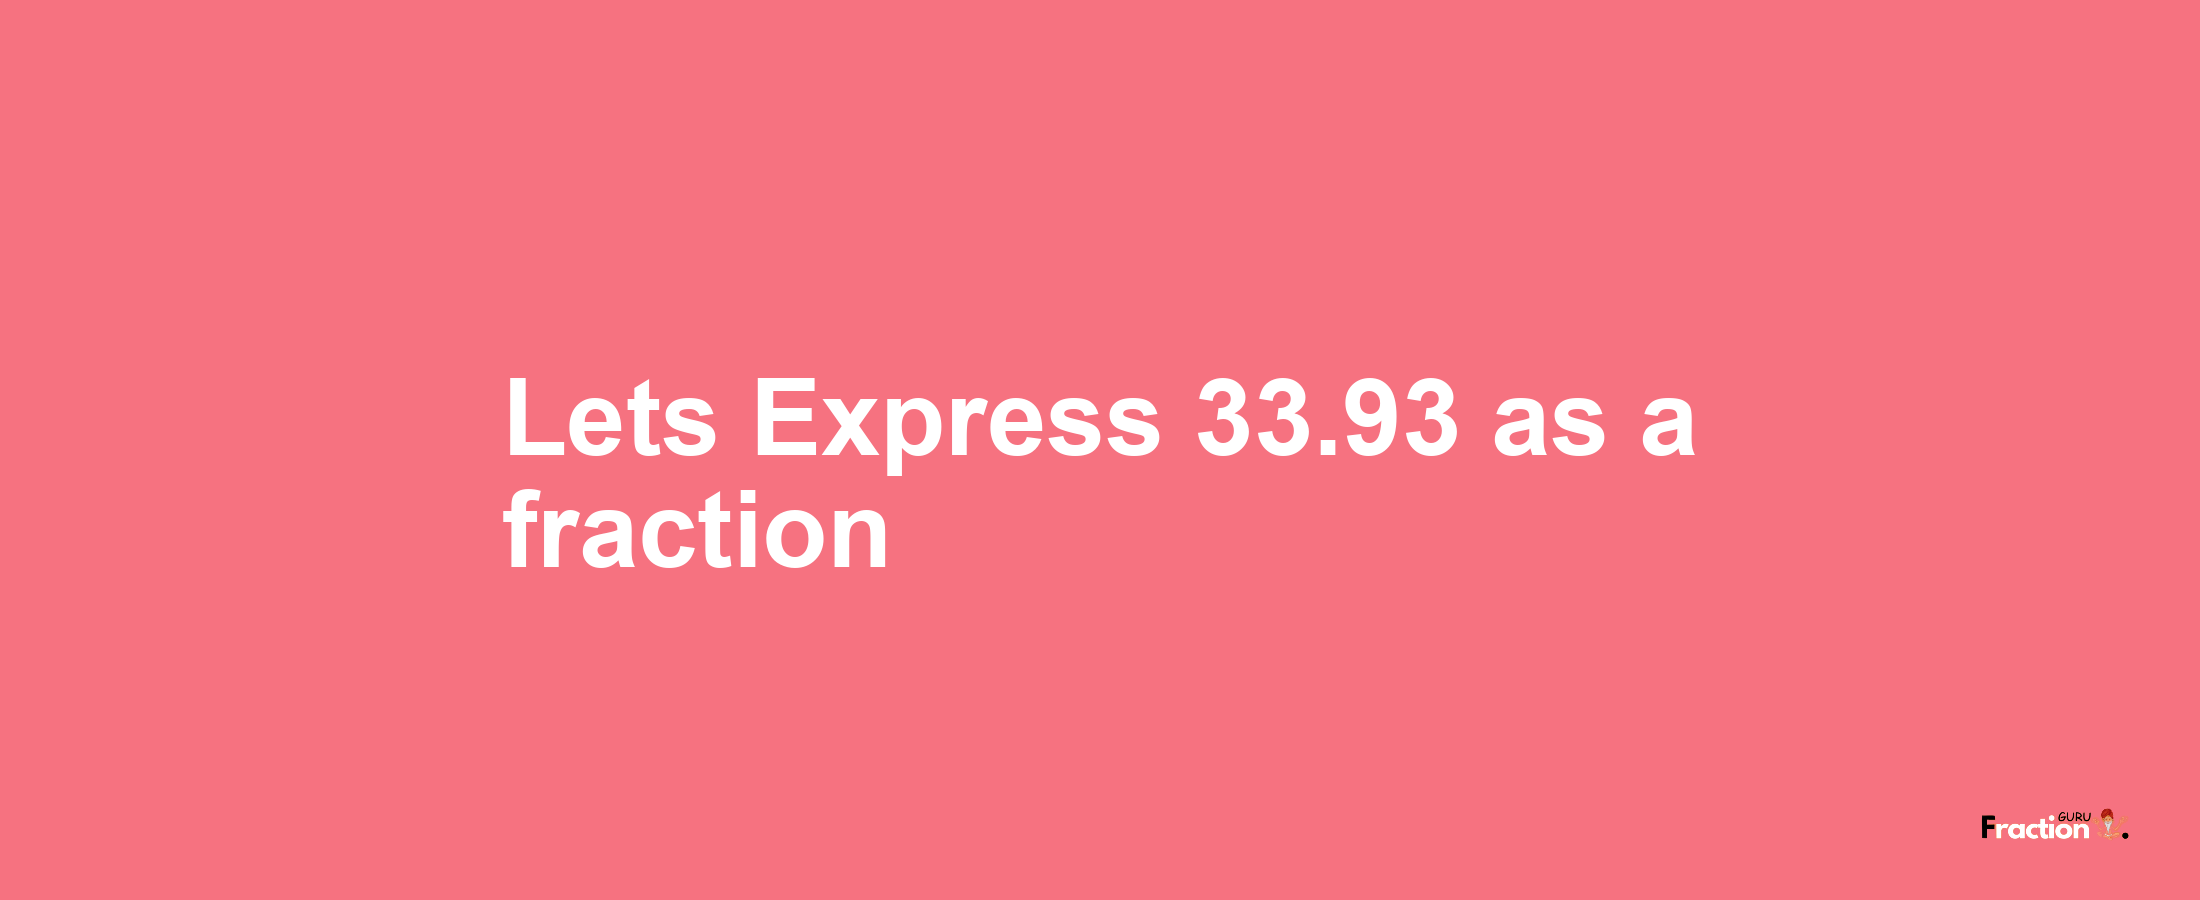 Lets Express 33.93 as afraction